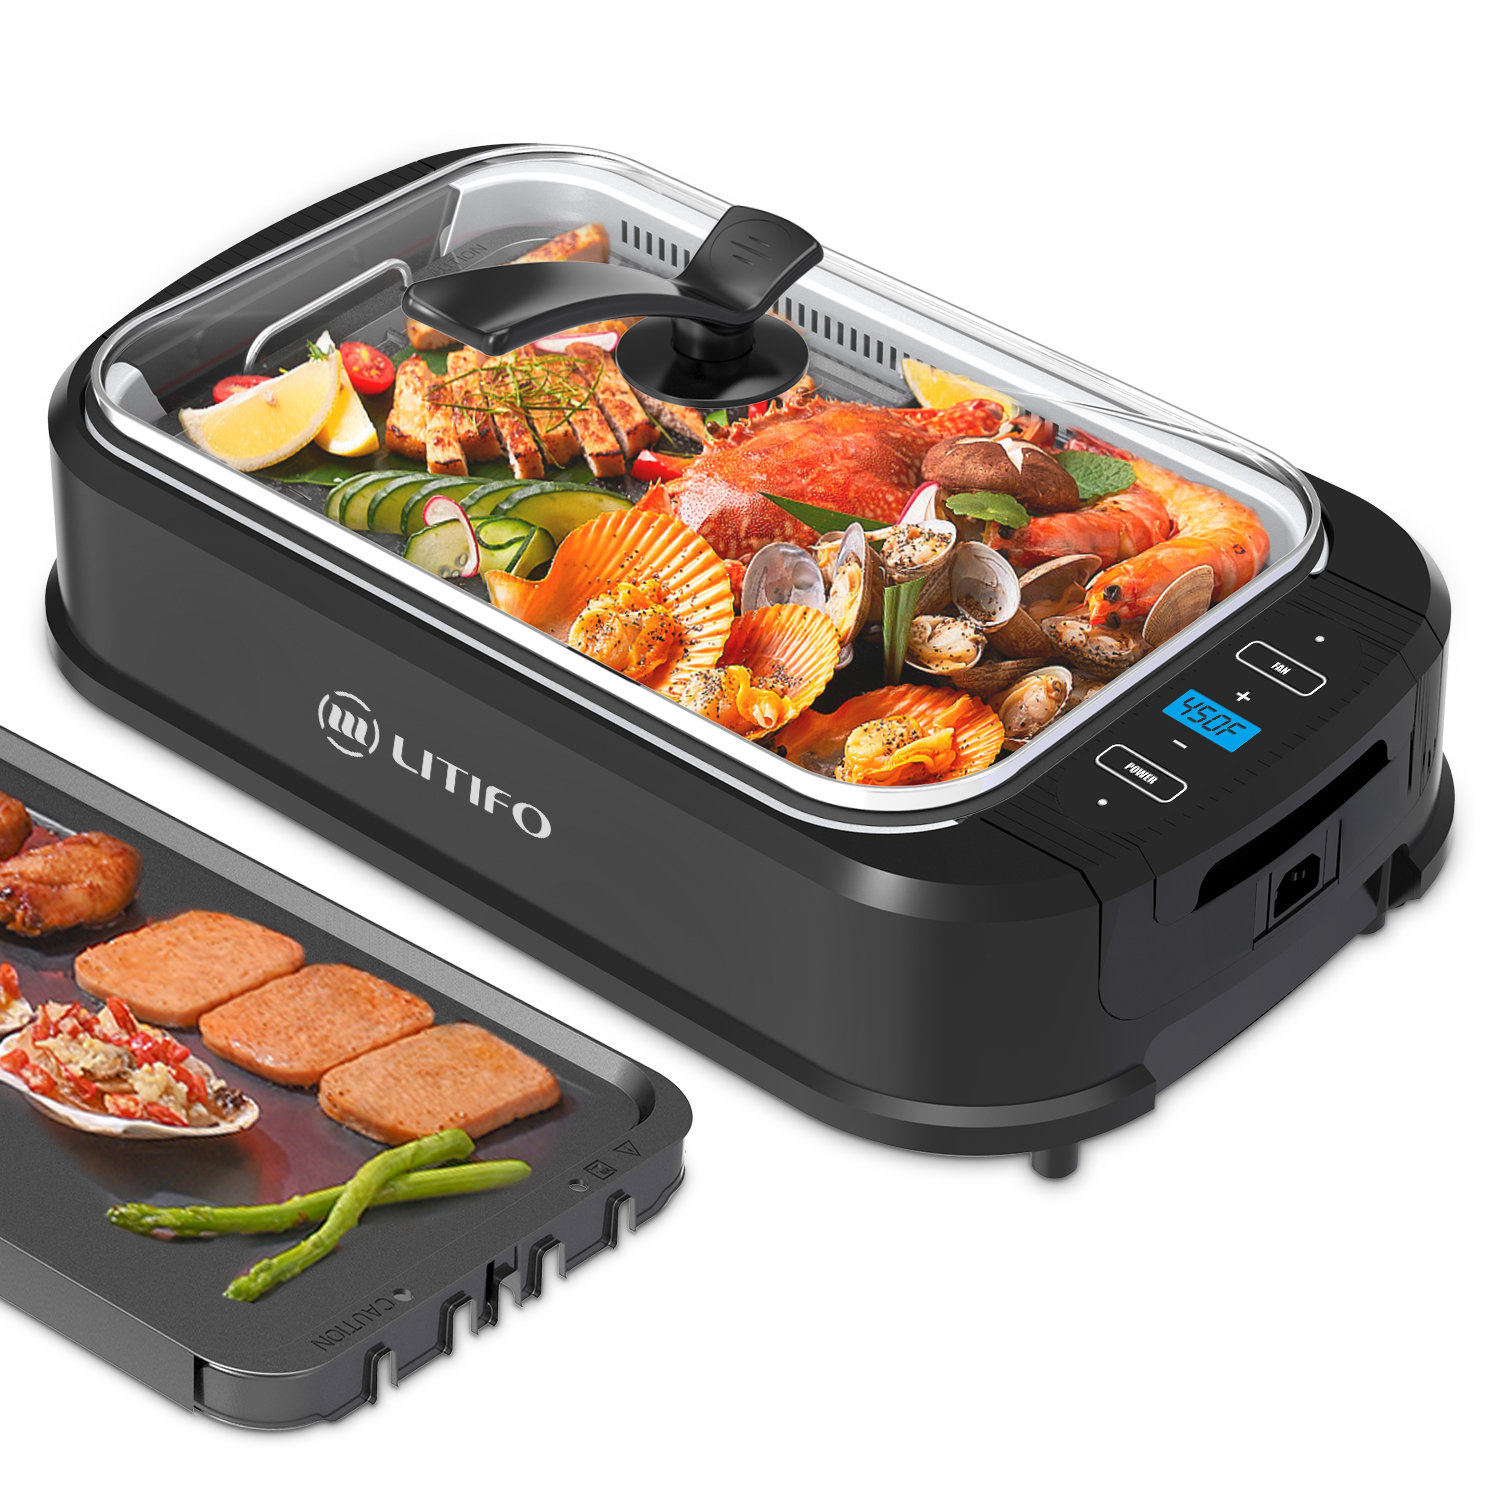 Litifo 16'' Smokeless Ceramic Non Stick Electric Grill with Lid